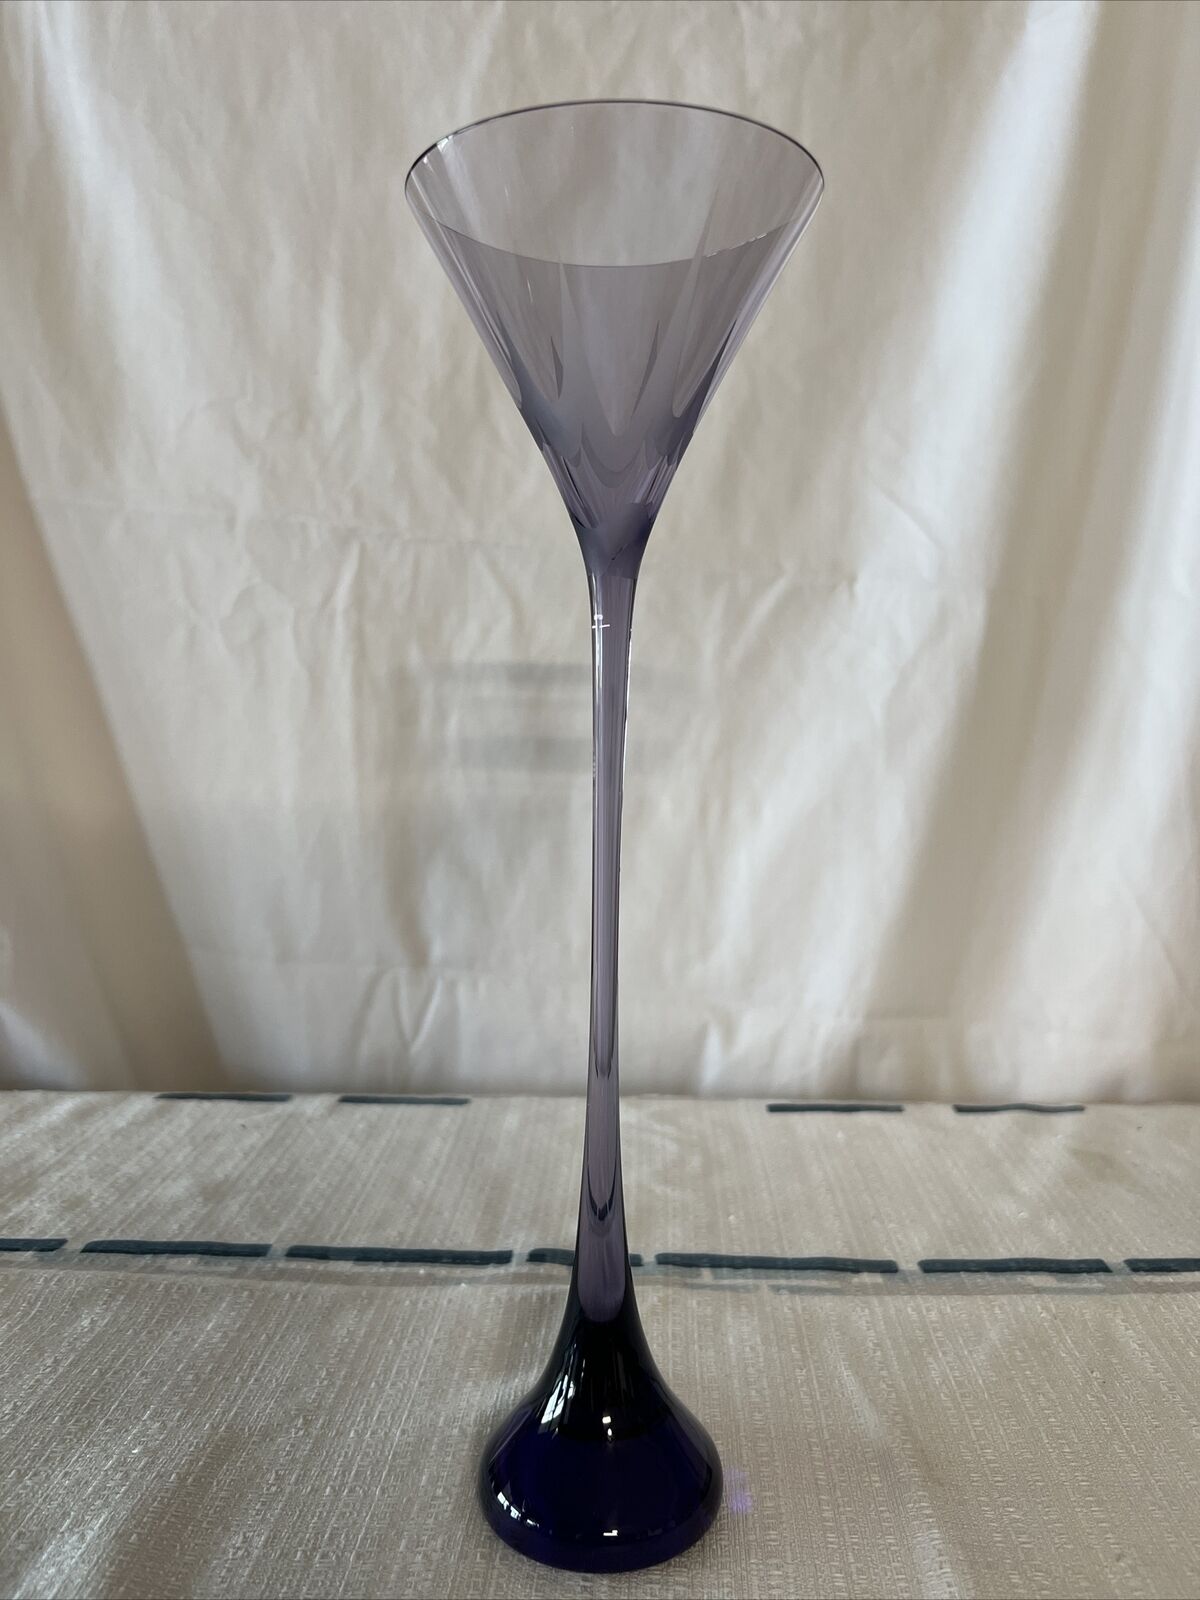 BACCARAT “Amethyst” MARTINI GLASS WITH STAR ETCHING 12\